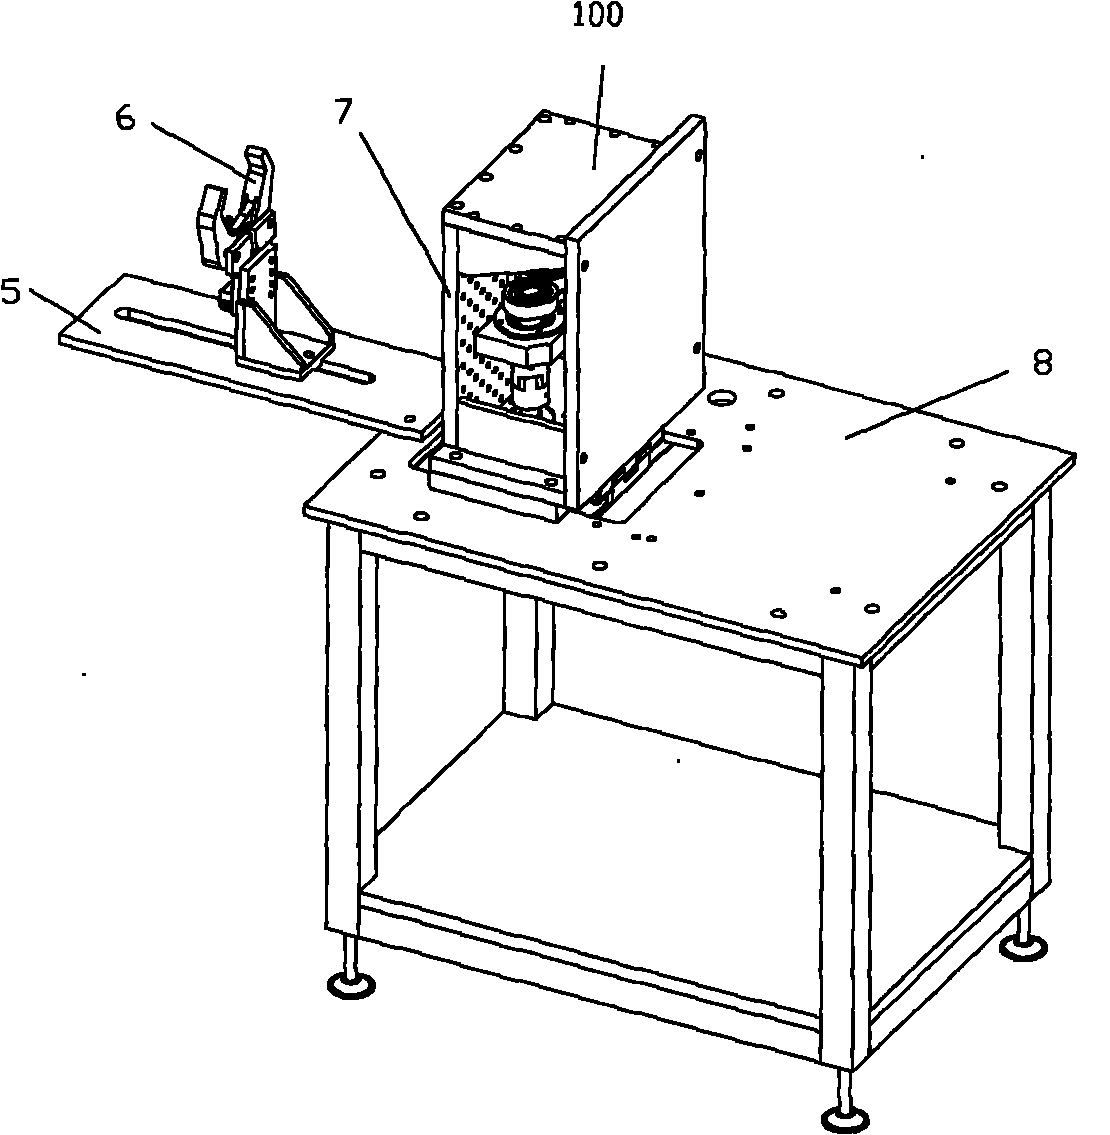 Testing device for load of jig saw